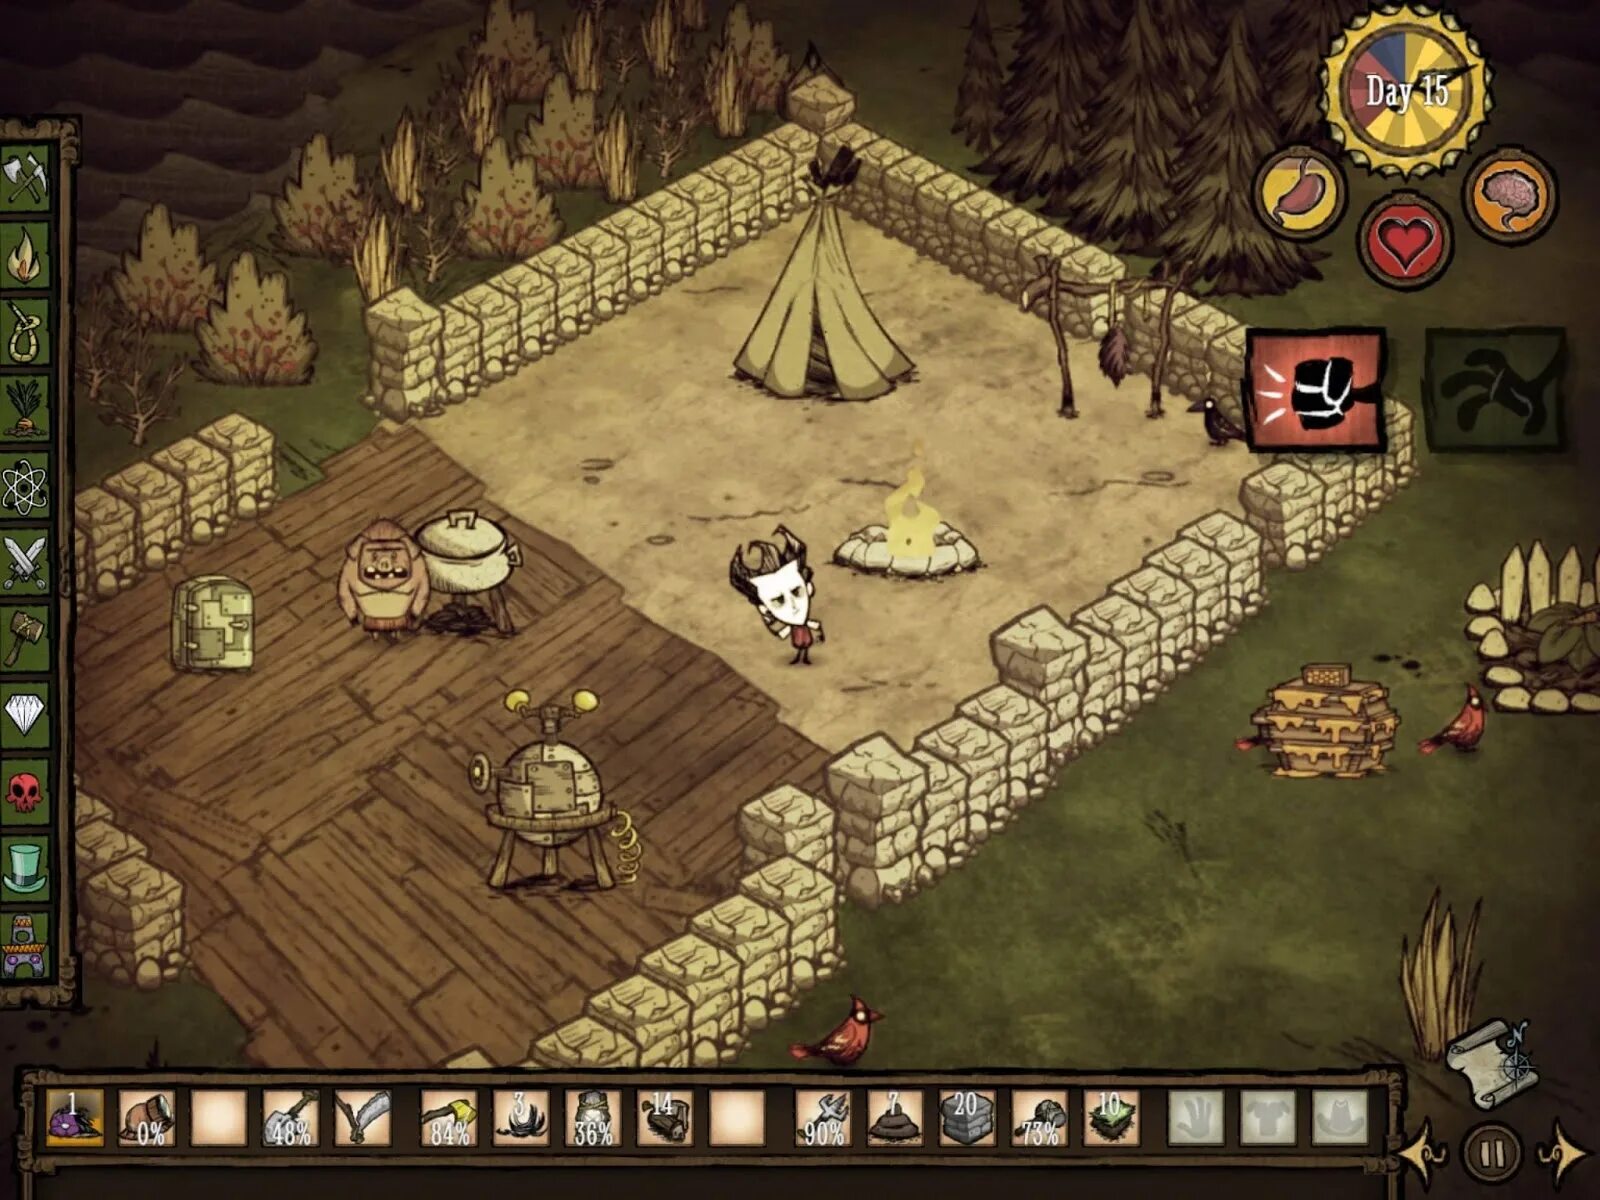 Don t starve starving games. Don t Starve игра. Don’t Starve: Pocket Edition 2. Выживалка донт старв. Don'Starve:Pocket Edition.